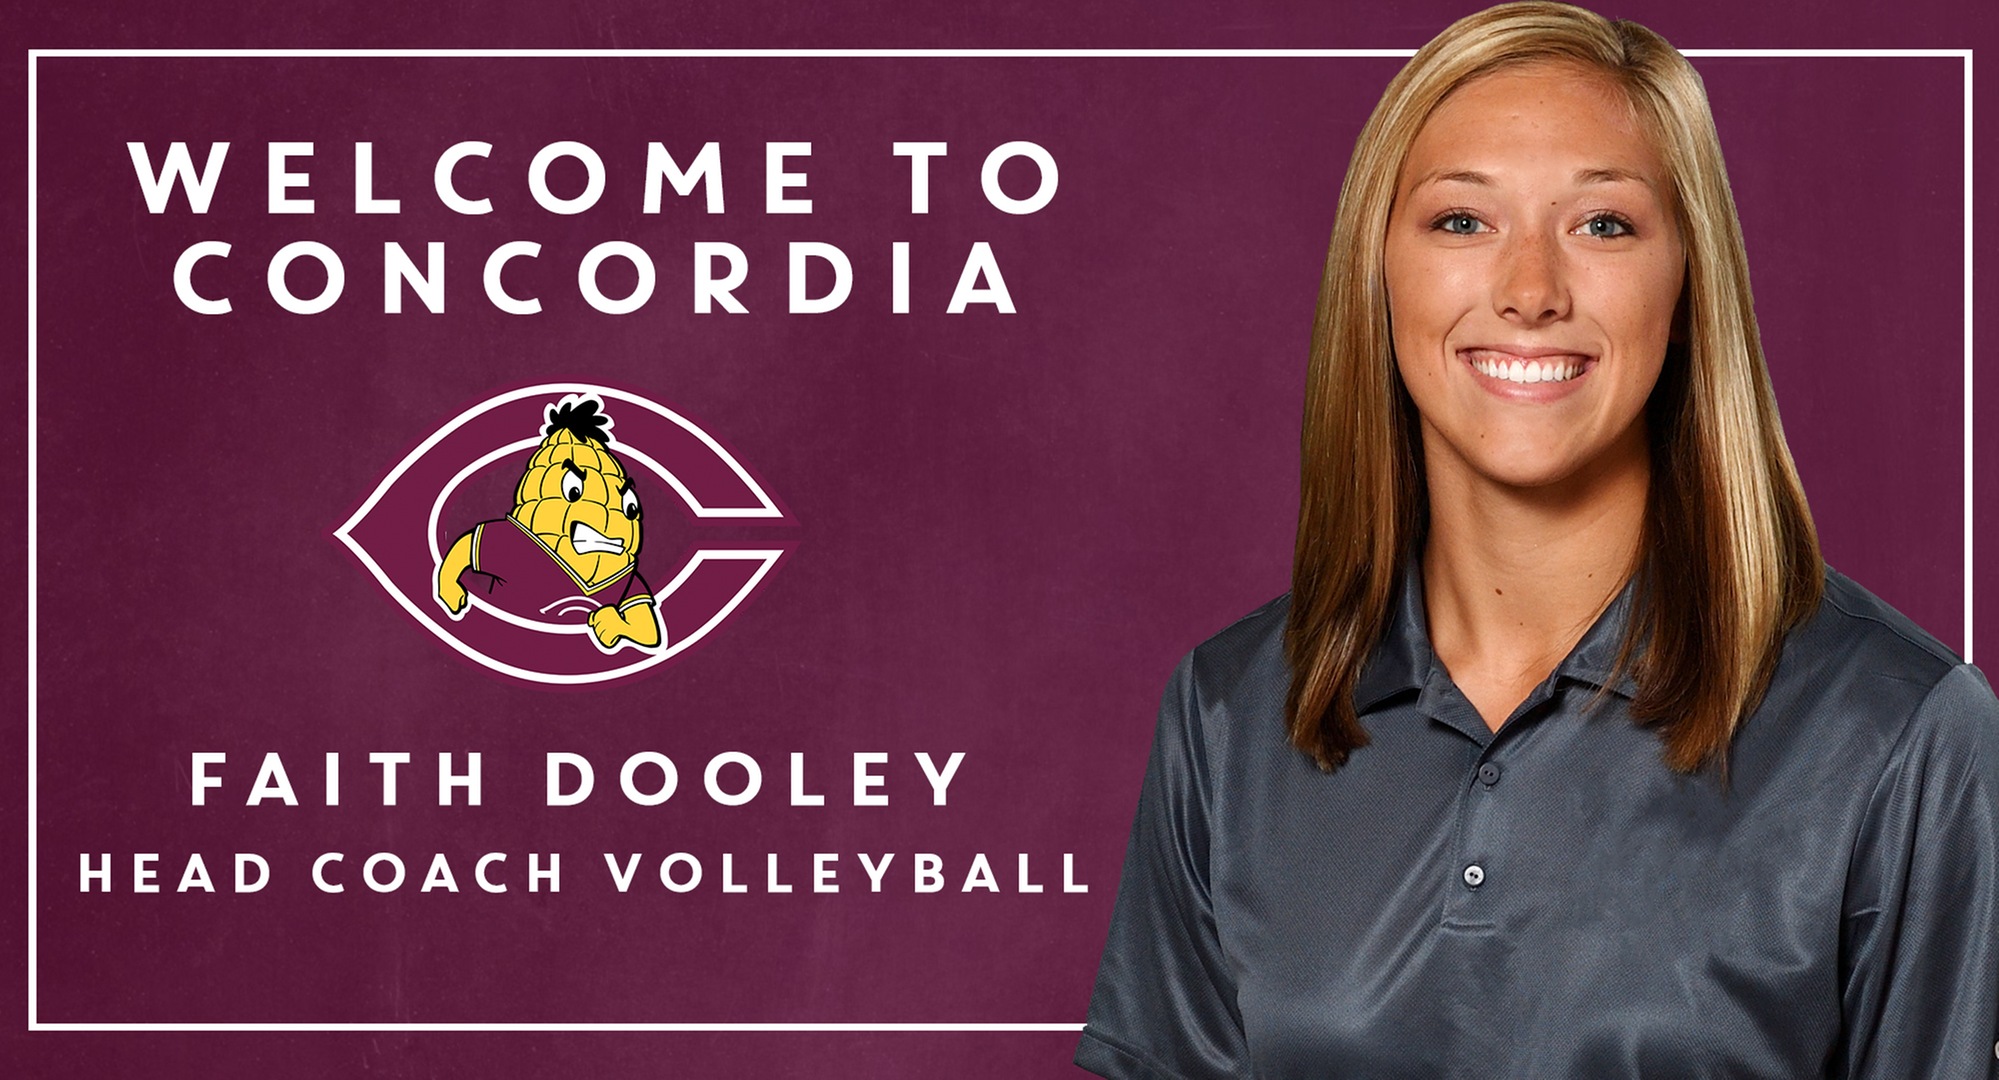 Concordia new volleyball head coach Faith Dooley was an All-American, and 4-time all-conference award winner, for the University of North Dakota.